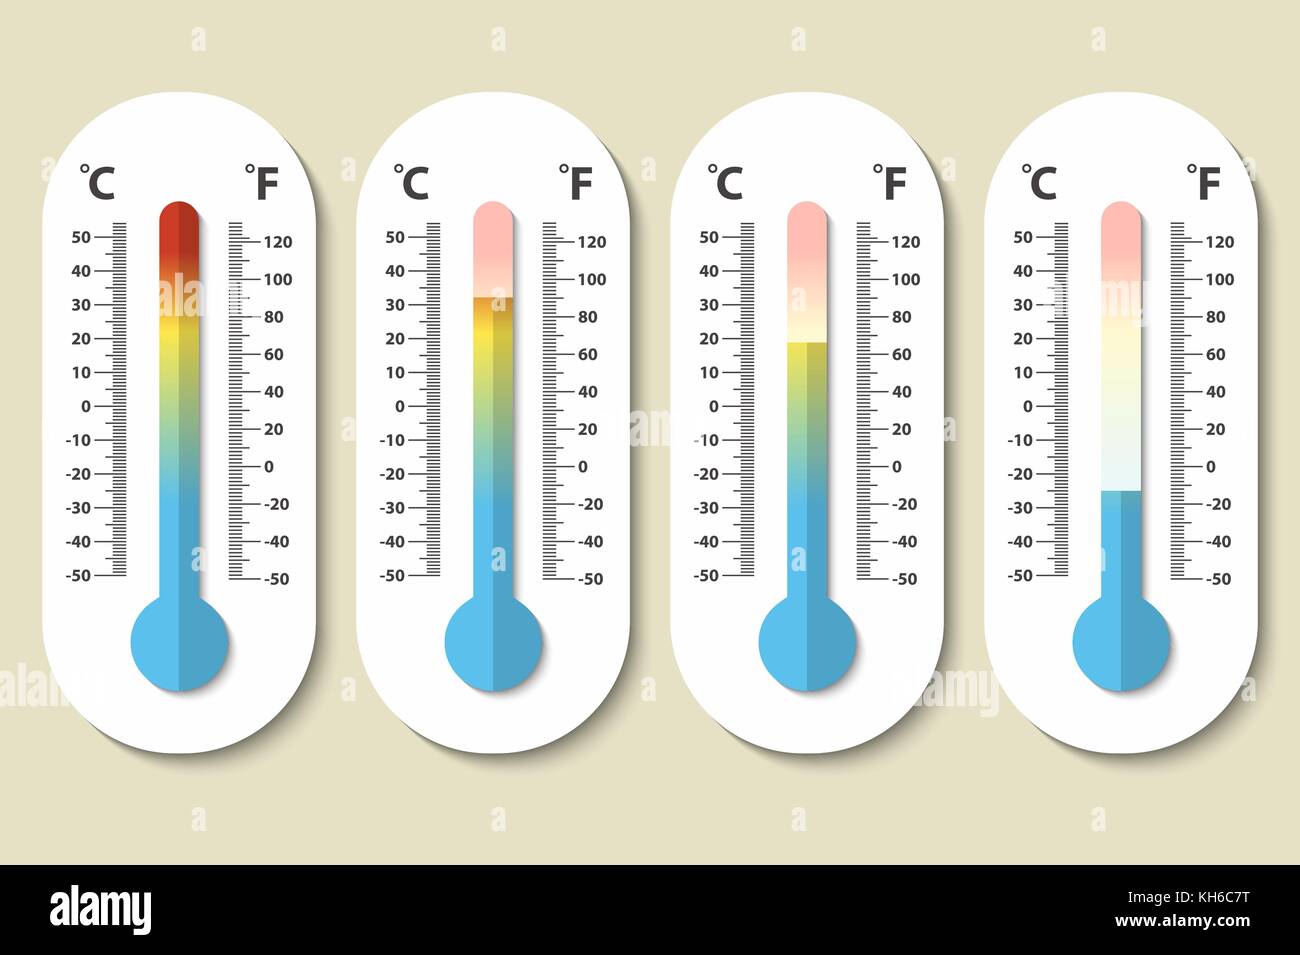 Meteorology thermometer temperature celsius Vector Image